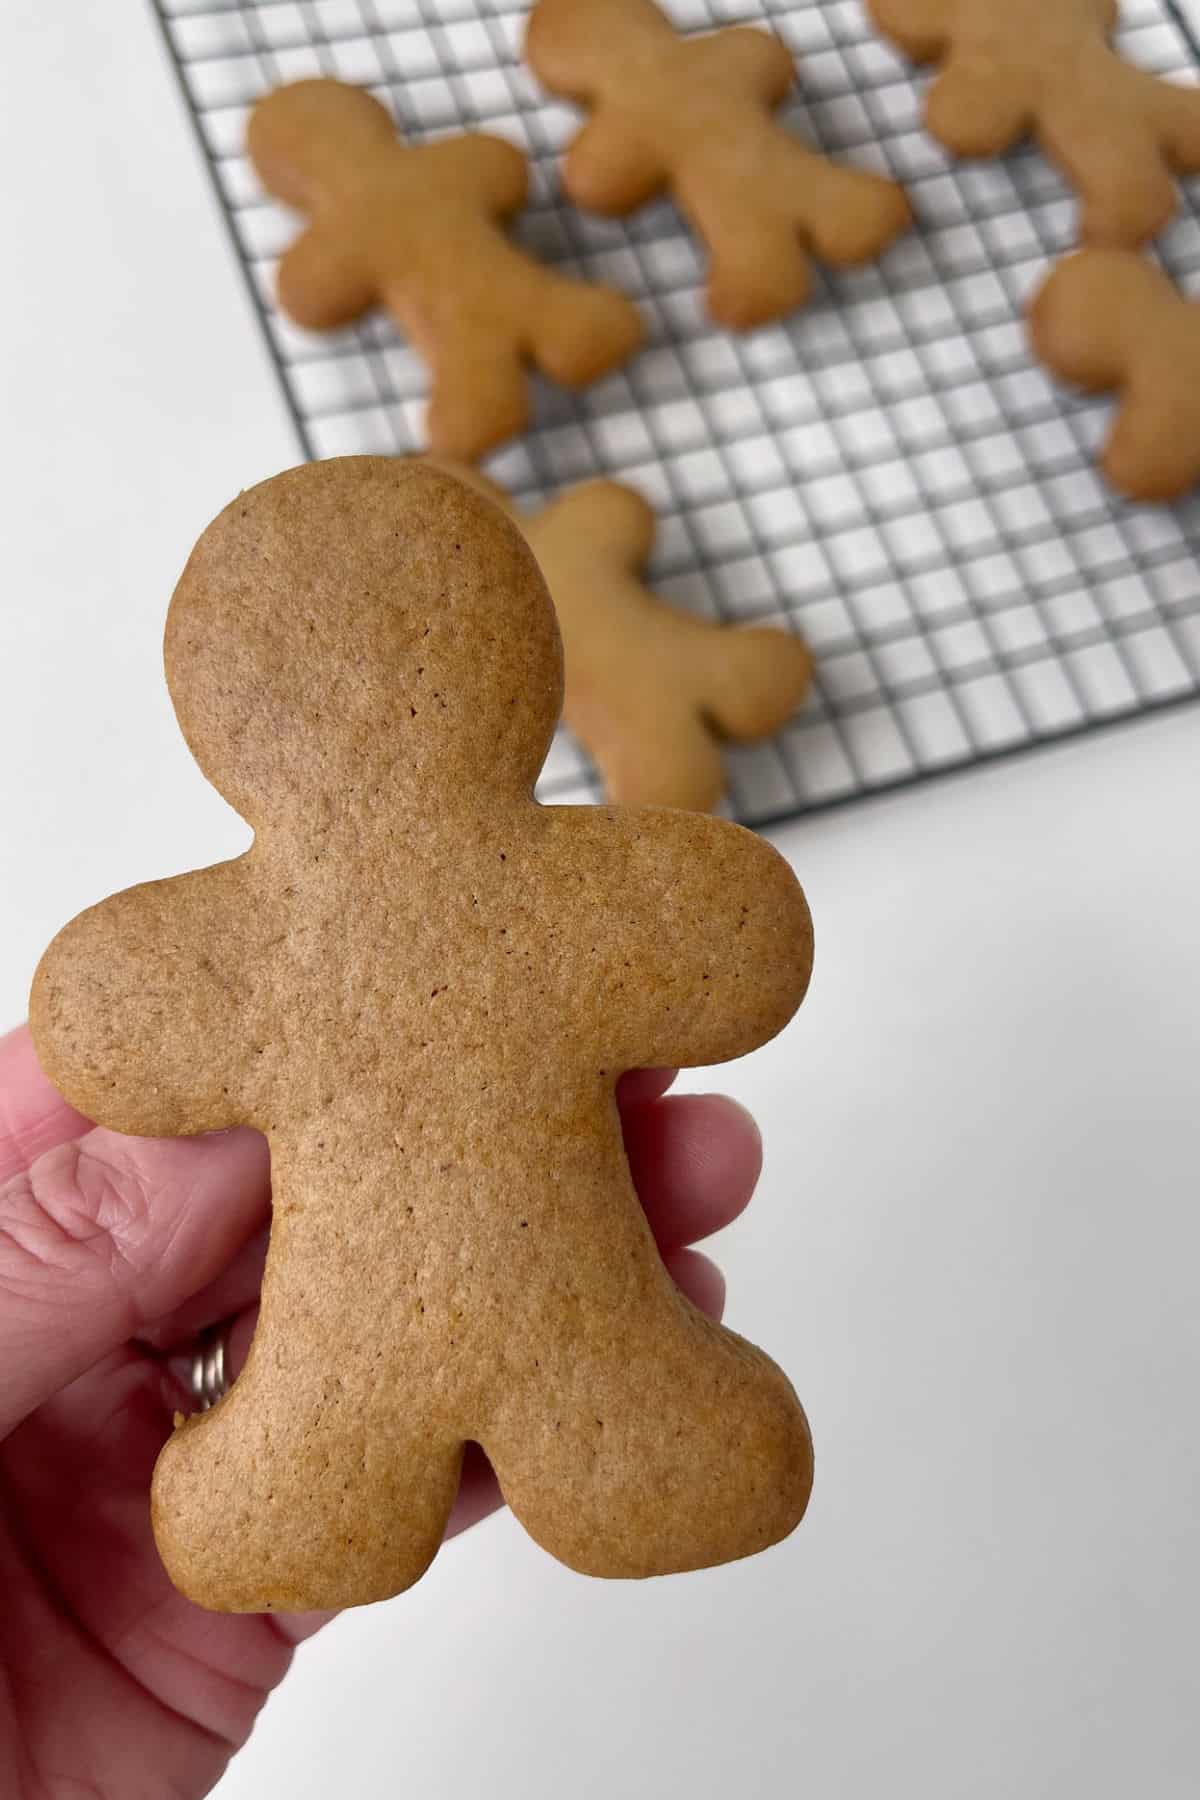 Adult holding a baked gingerbread person.